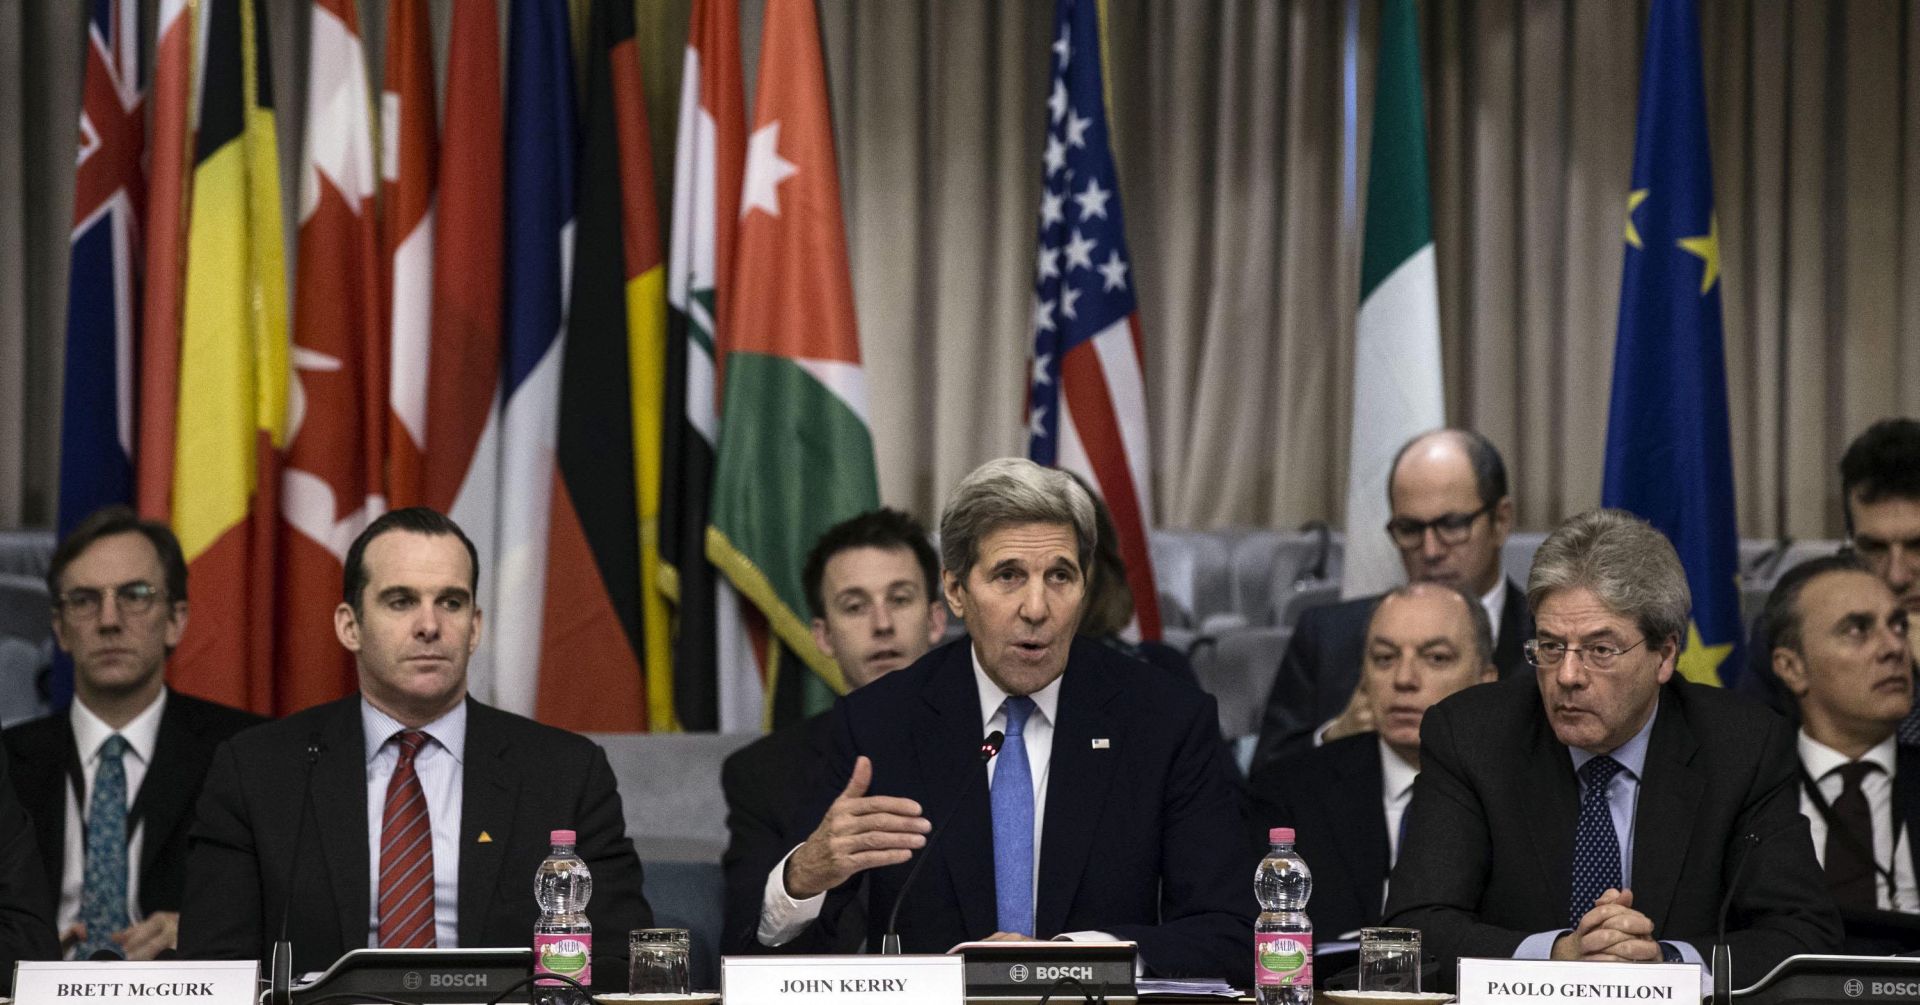 epa05139383 US Secretary of State John Kerry (C) speaks next to Italian Foreign Minister Paolo Gentiloni, in Rome, Italy, 02 February 2016. Kerry is in Rome for a meeting of the core countries of the US-led military coalition fighting the IS group.  EPA/ANGELO CARCONI